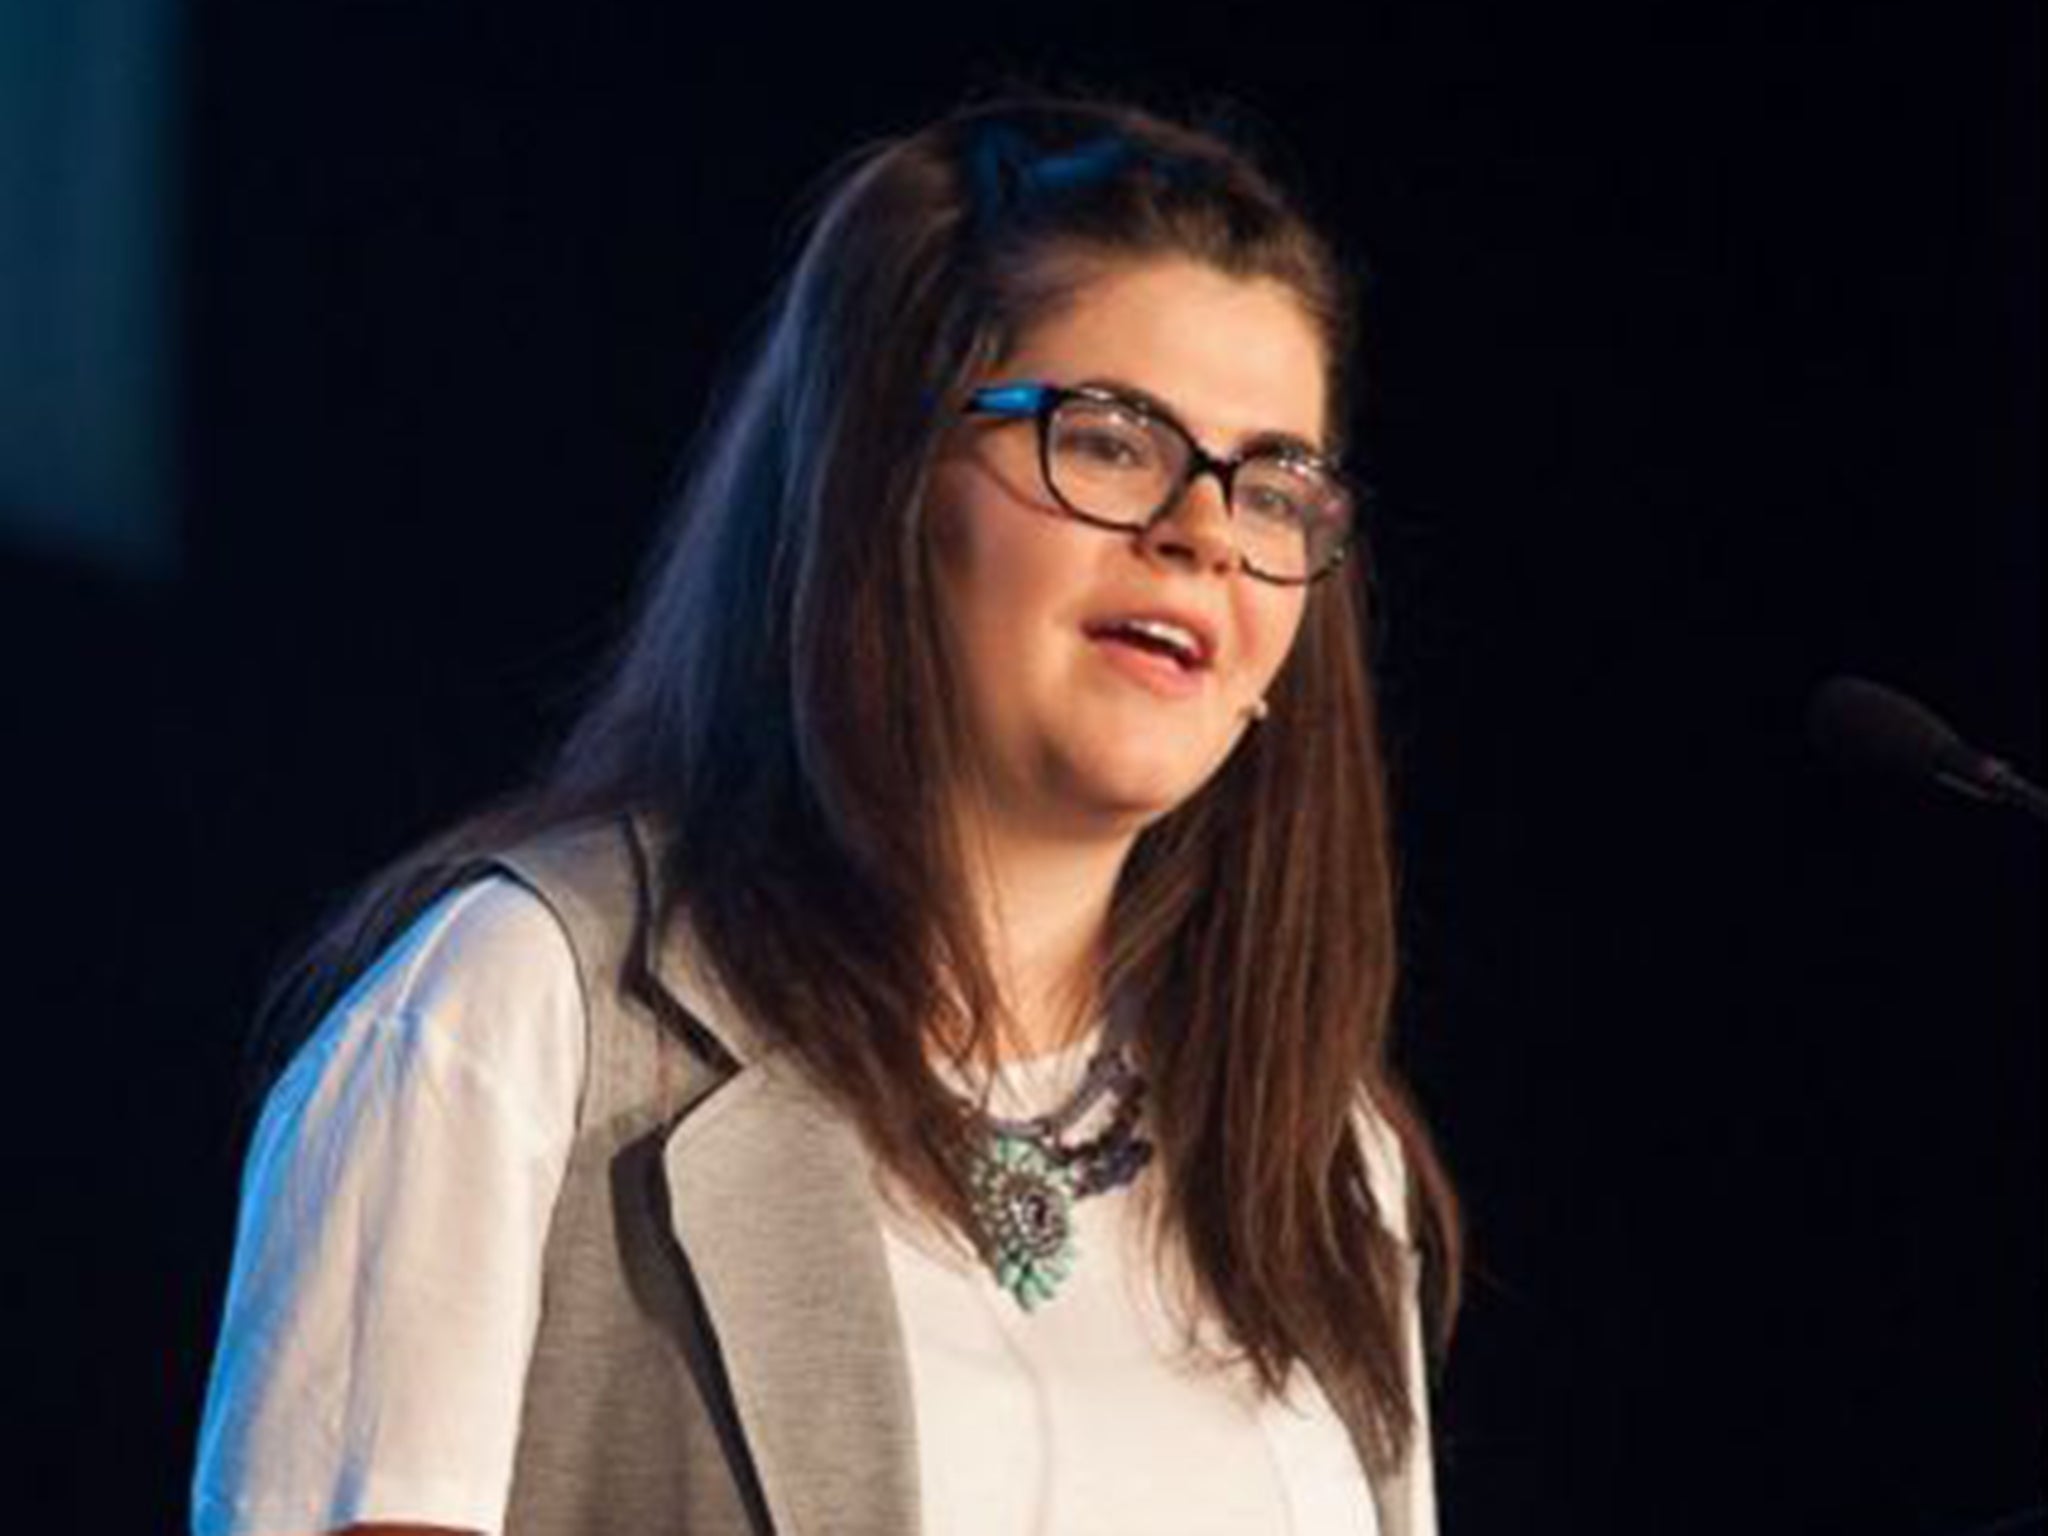 Megan Dunn was elected as president of the National Union of Students in April